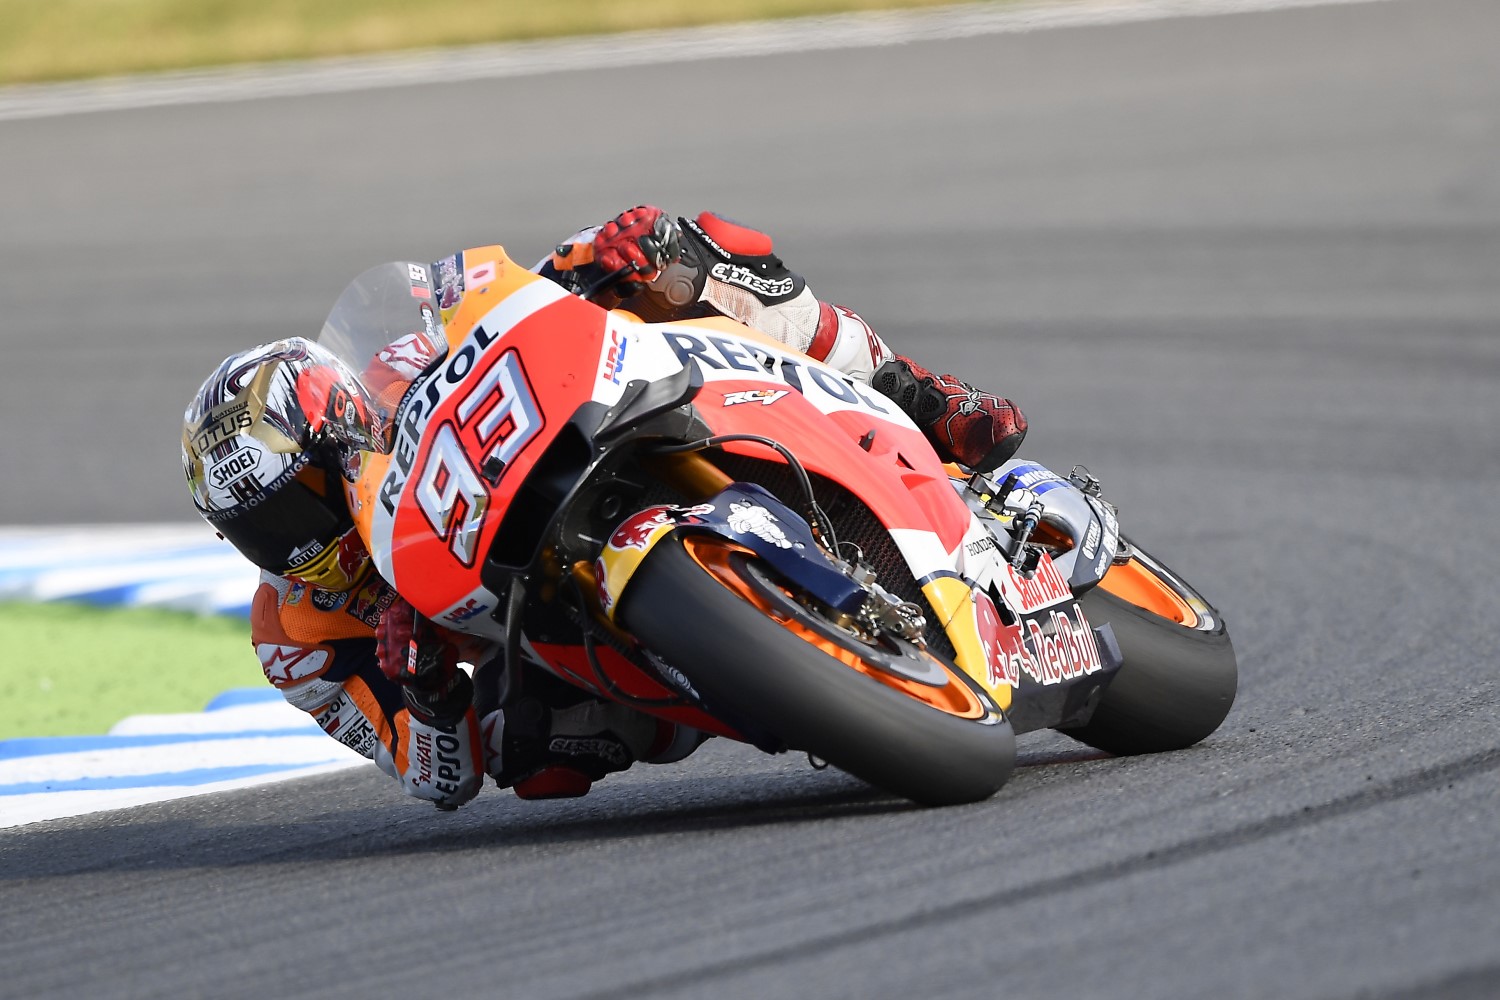 Marquez is one of, if not the best, Bike racer of all time